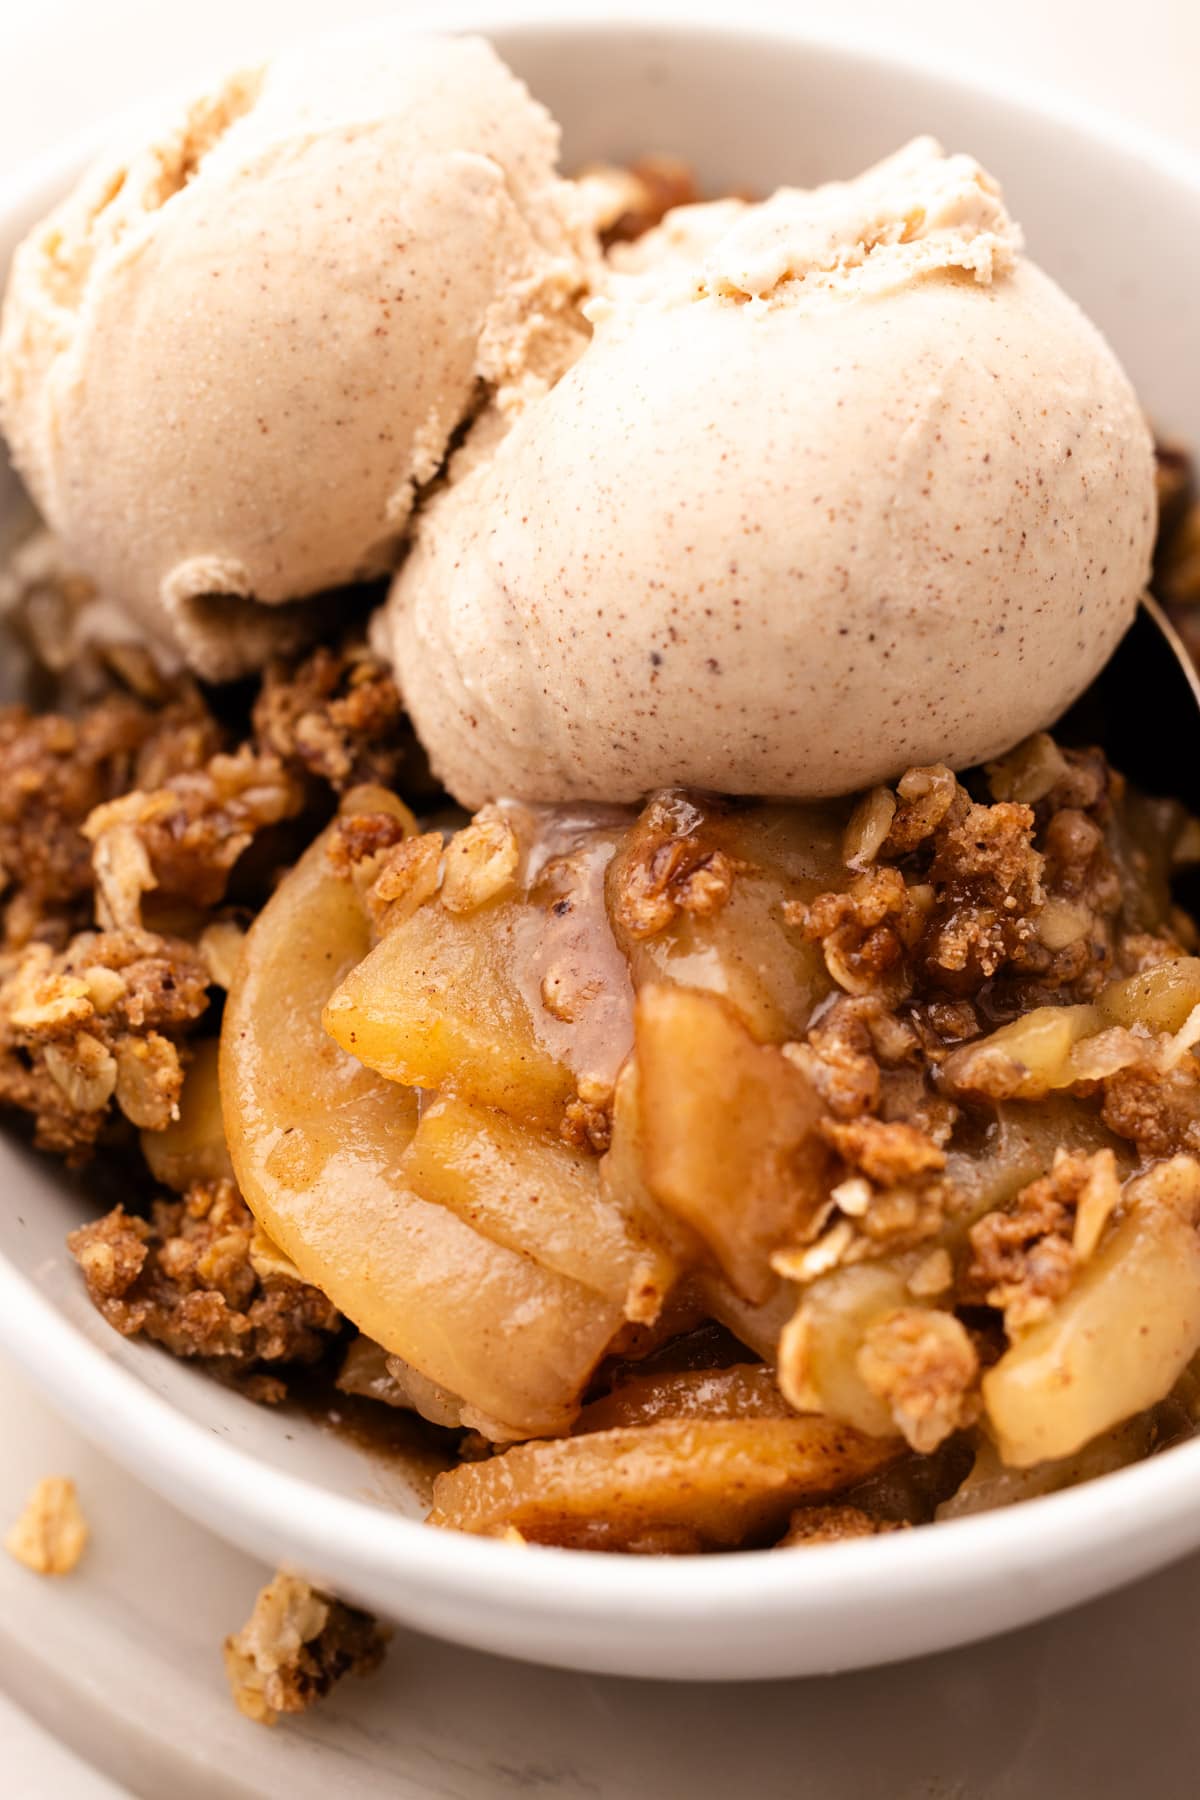 A bowl of baked apple crisp made from wholesome ingredients topped with two scoops of ice cream.